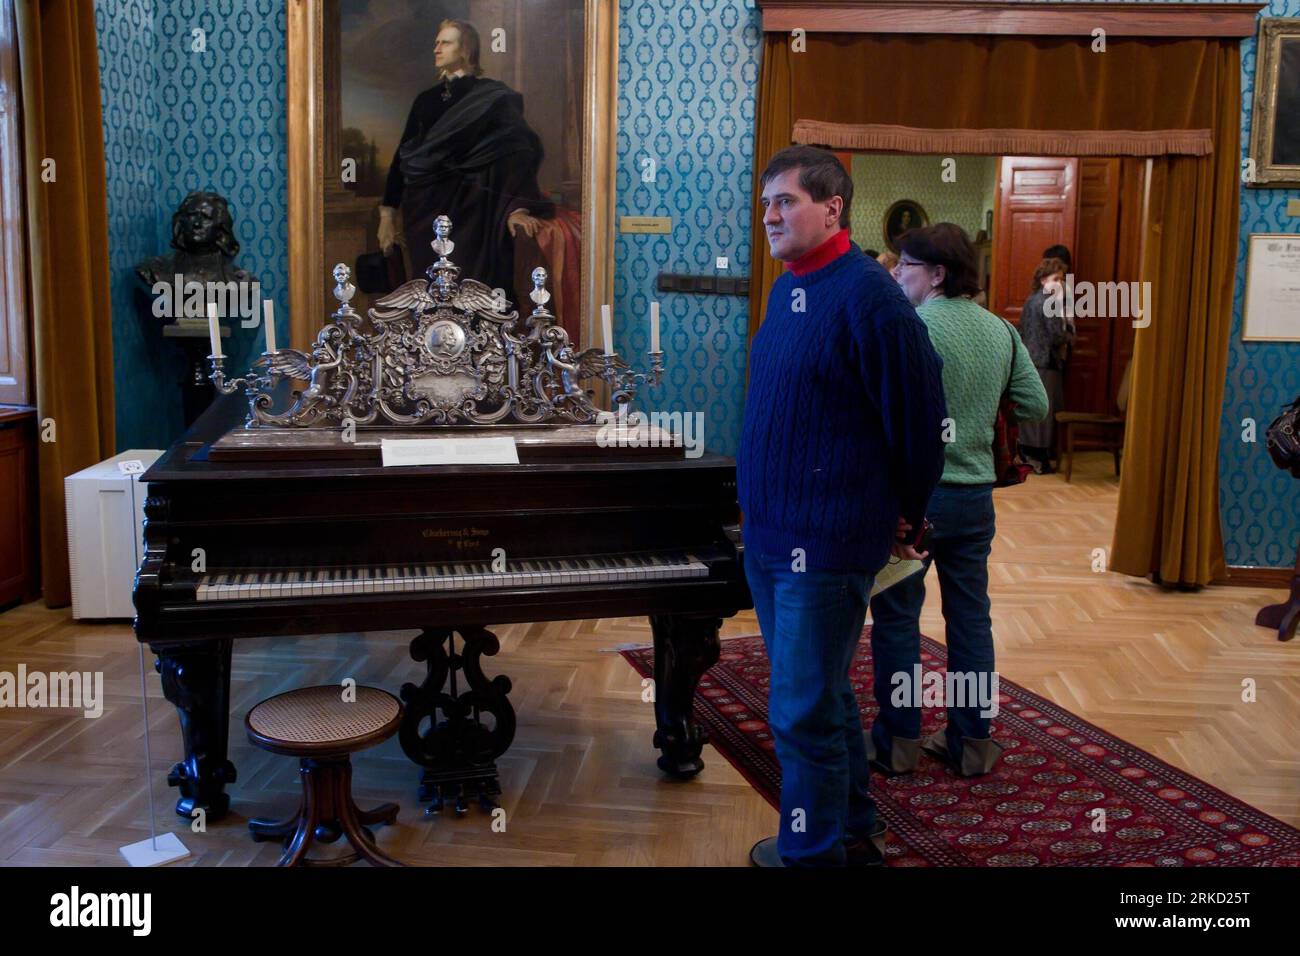 Bildnummer: 54845596  Datum: 22.01.2011  Copyright: imago/Xinhua (110123) -- BUDAPEST, Jan. 23, 2011 (Xinhua) -- Visitors look at relics of the famous composer Ferenc Liszt, or Franz Liszt in German, on display in the Franz Liszt Museum on the day of Hungarian culture in Budapest, Hungary on Jan. 22, 2011. A performance by the Hungarian National Philharmonic Saturday launched the Ferenc Liszt Year, a celebration of the famed 19th century Hungarian pianist and romantic composer who was born 200 years ago. (Xinhua/Attila Volgyi) (cl) HUNGARY-FERENC LISZT YEAR PUBLICATIONxNOTxINxCHN Reisen Ungarn Stock Photo